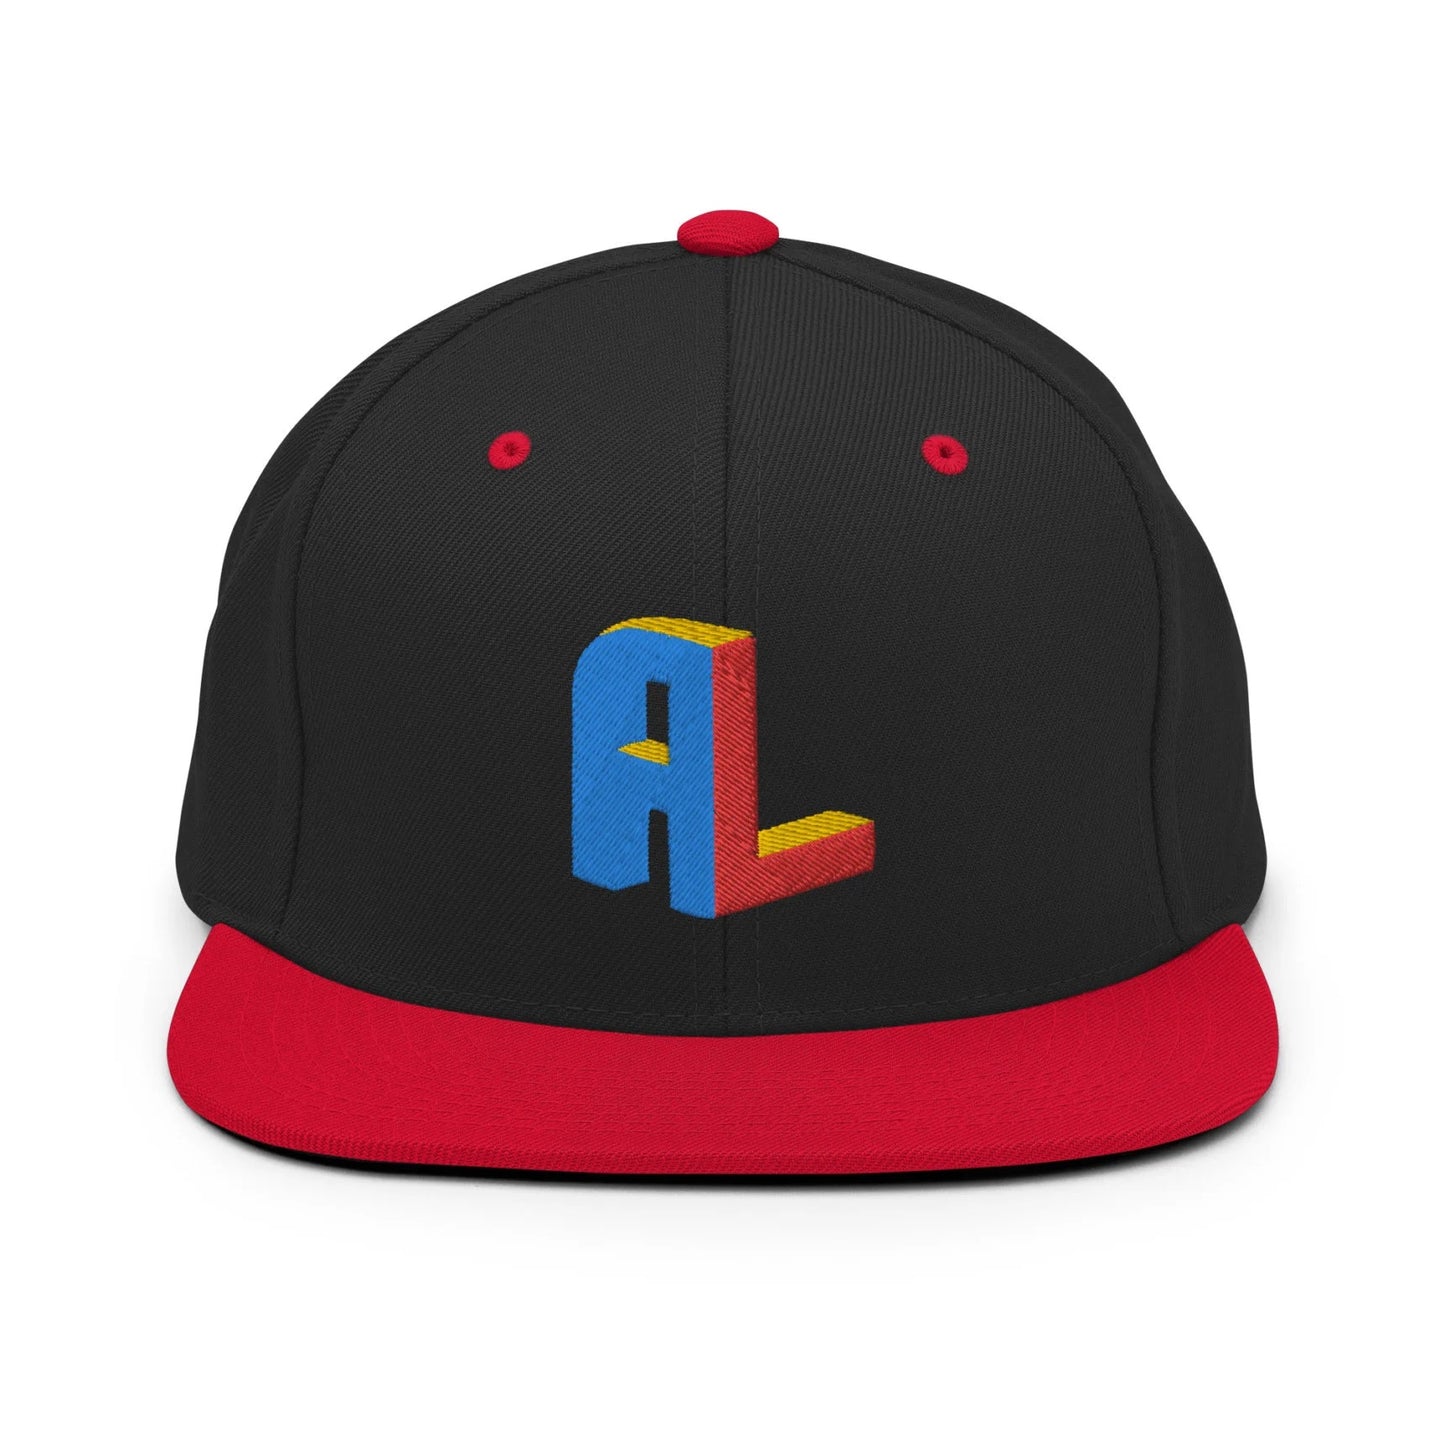 Ance Larmstrong ShowZone snapback hat in black with red brim and accents